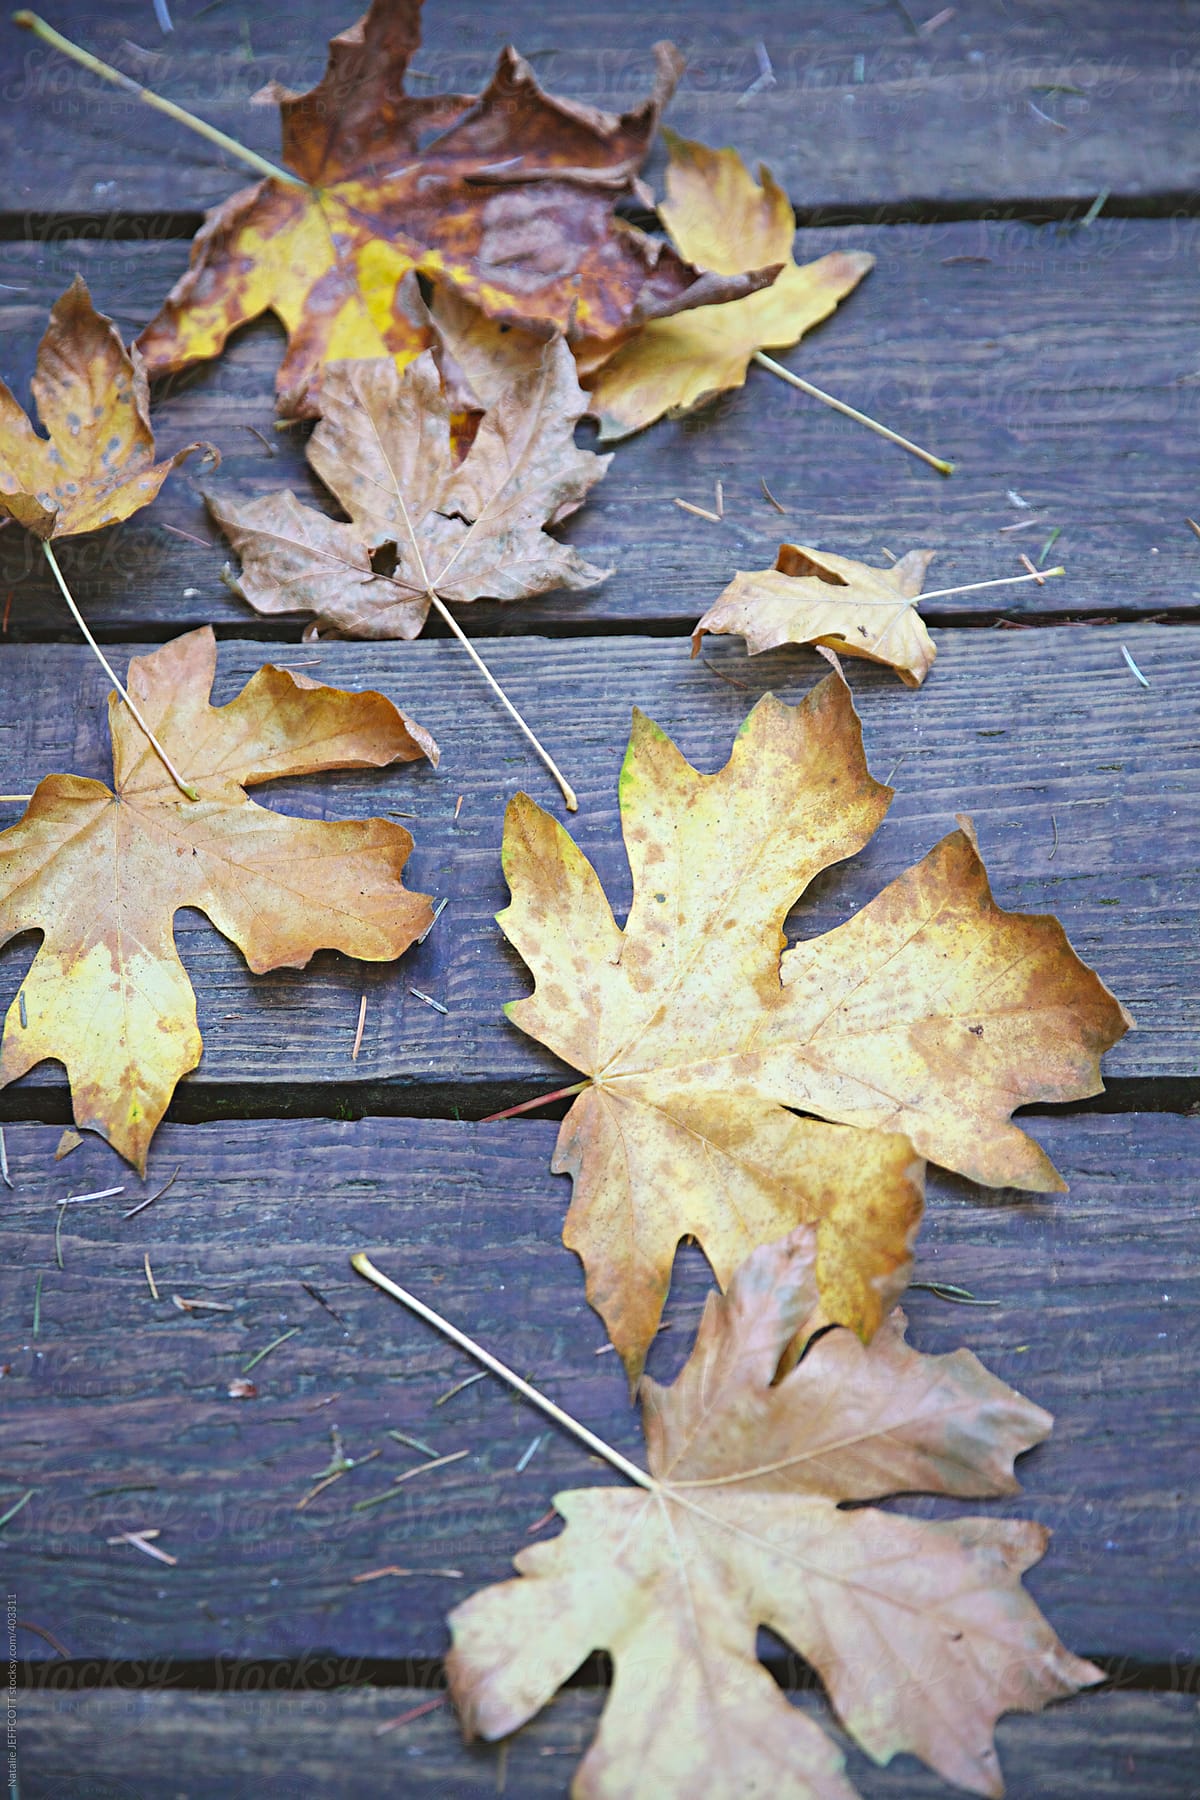 leaves lie on a wooden or timber path during Fall / Autumn